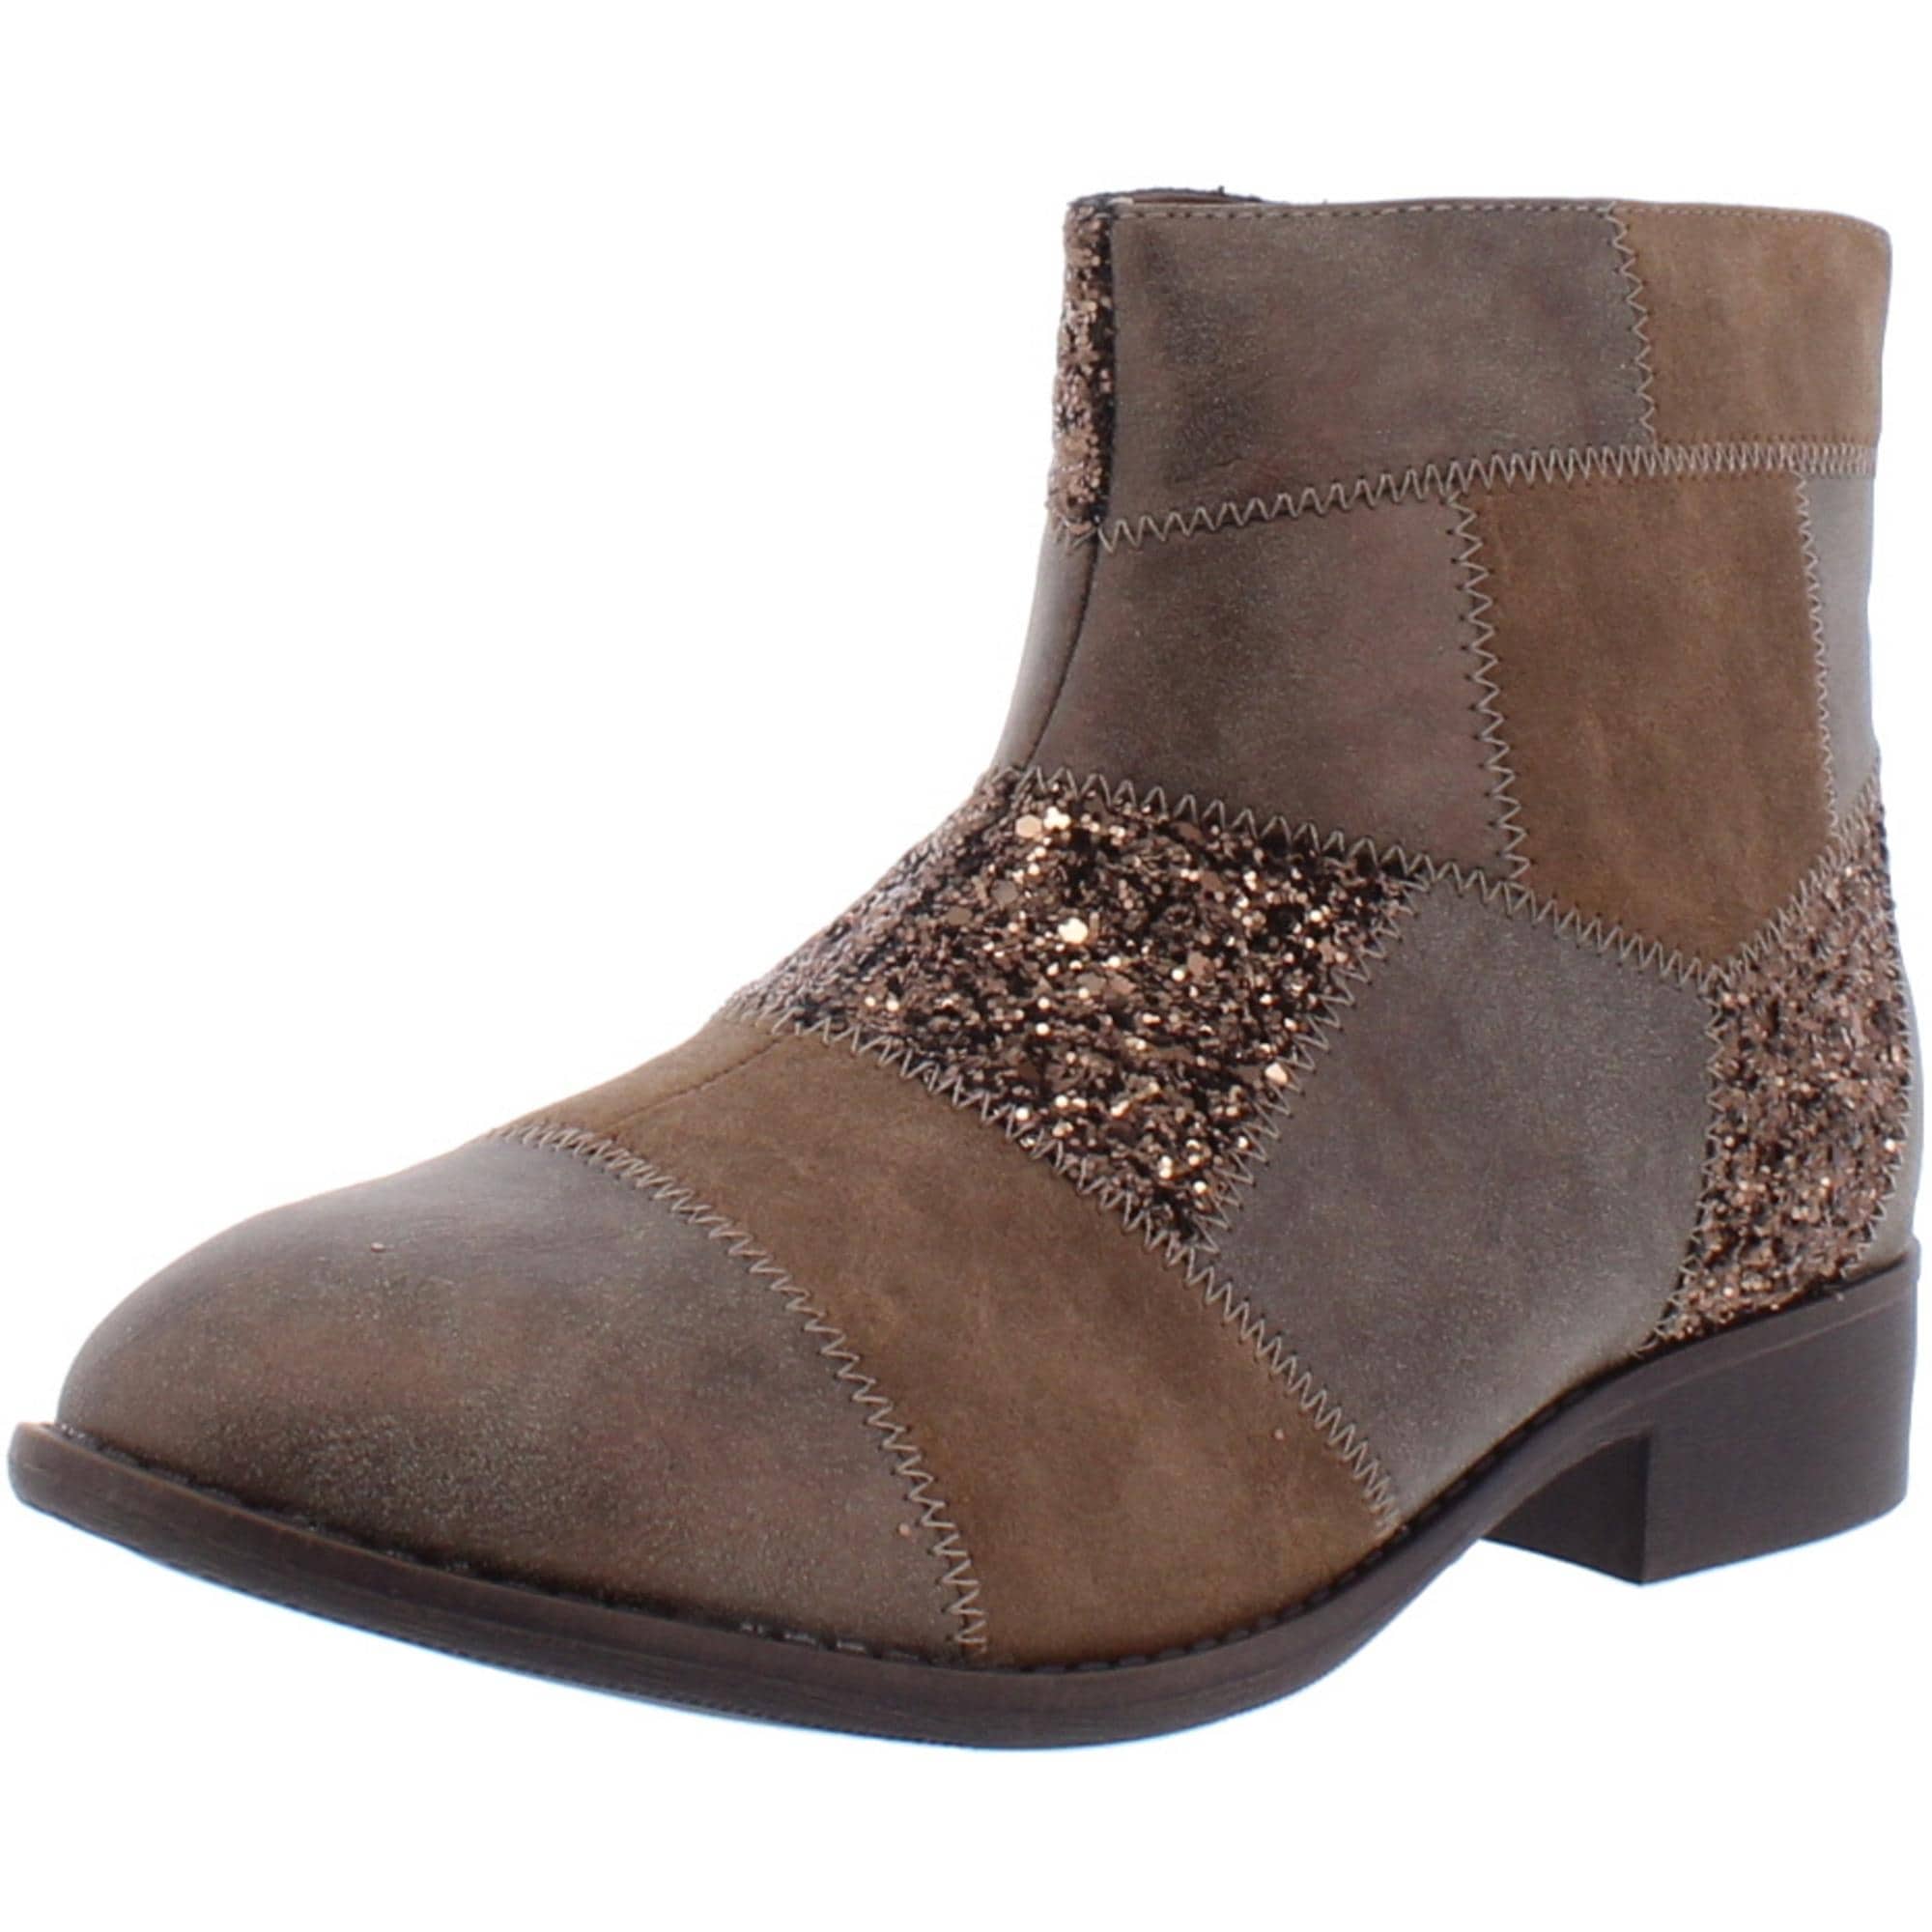 Nina Girls Ines Ankle Boots Leather 